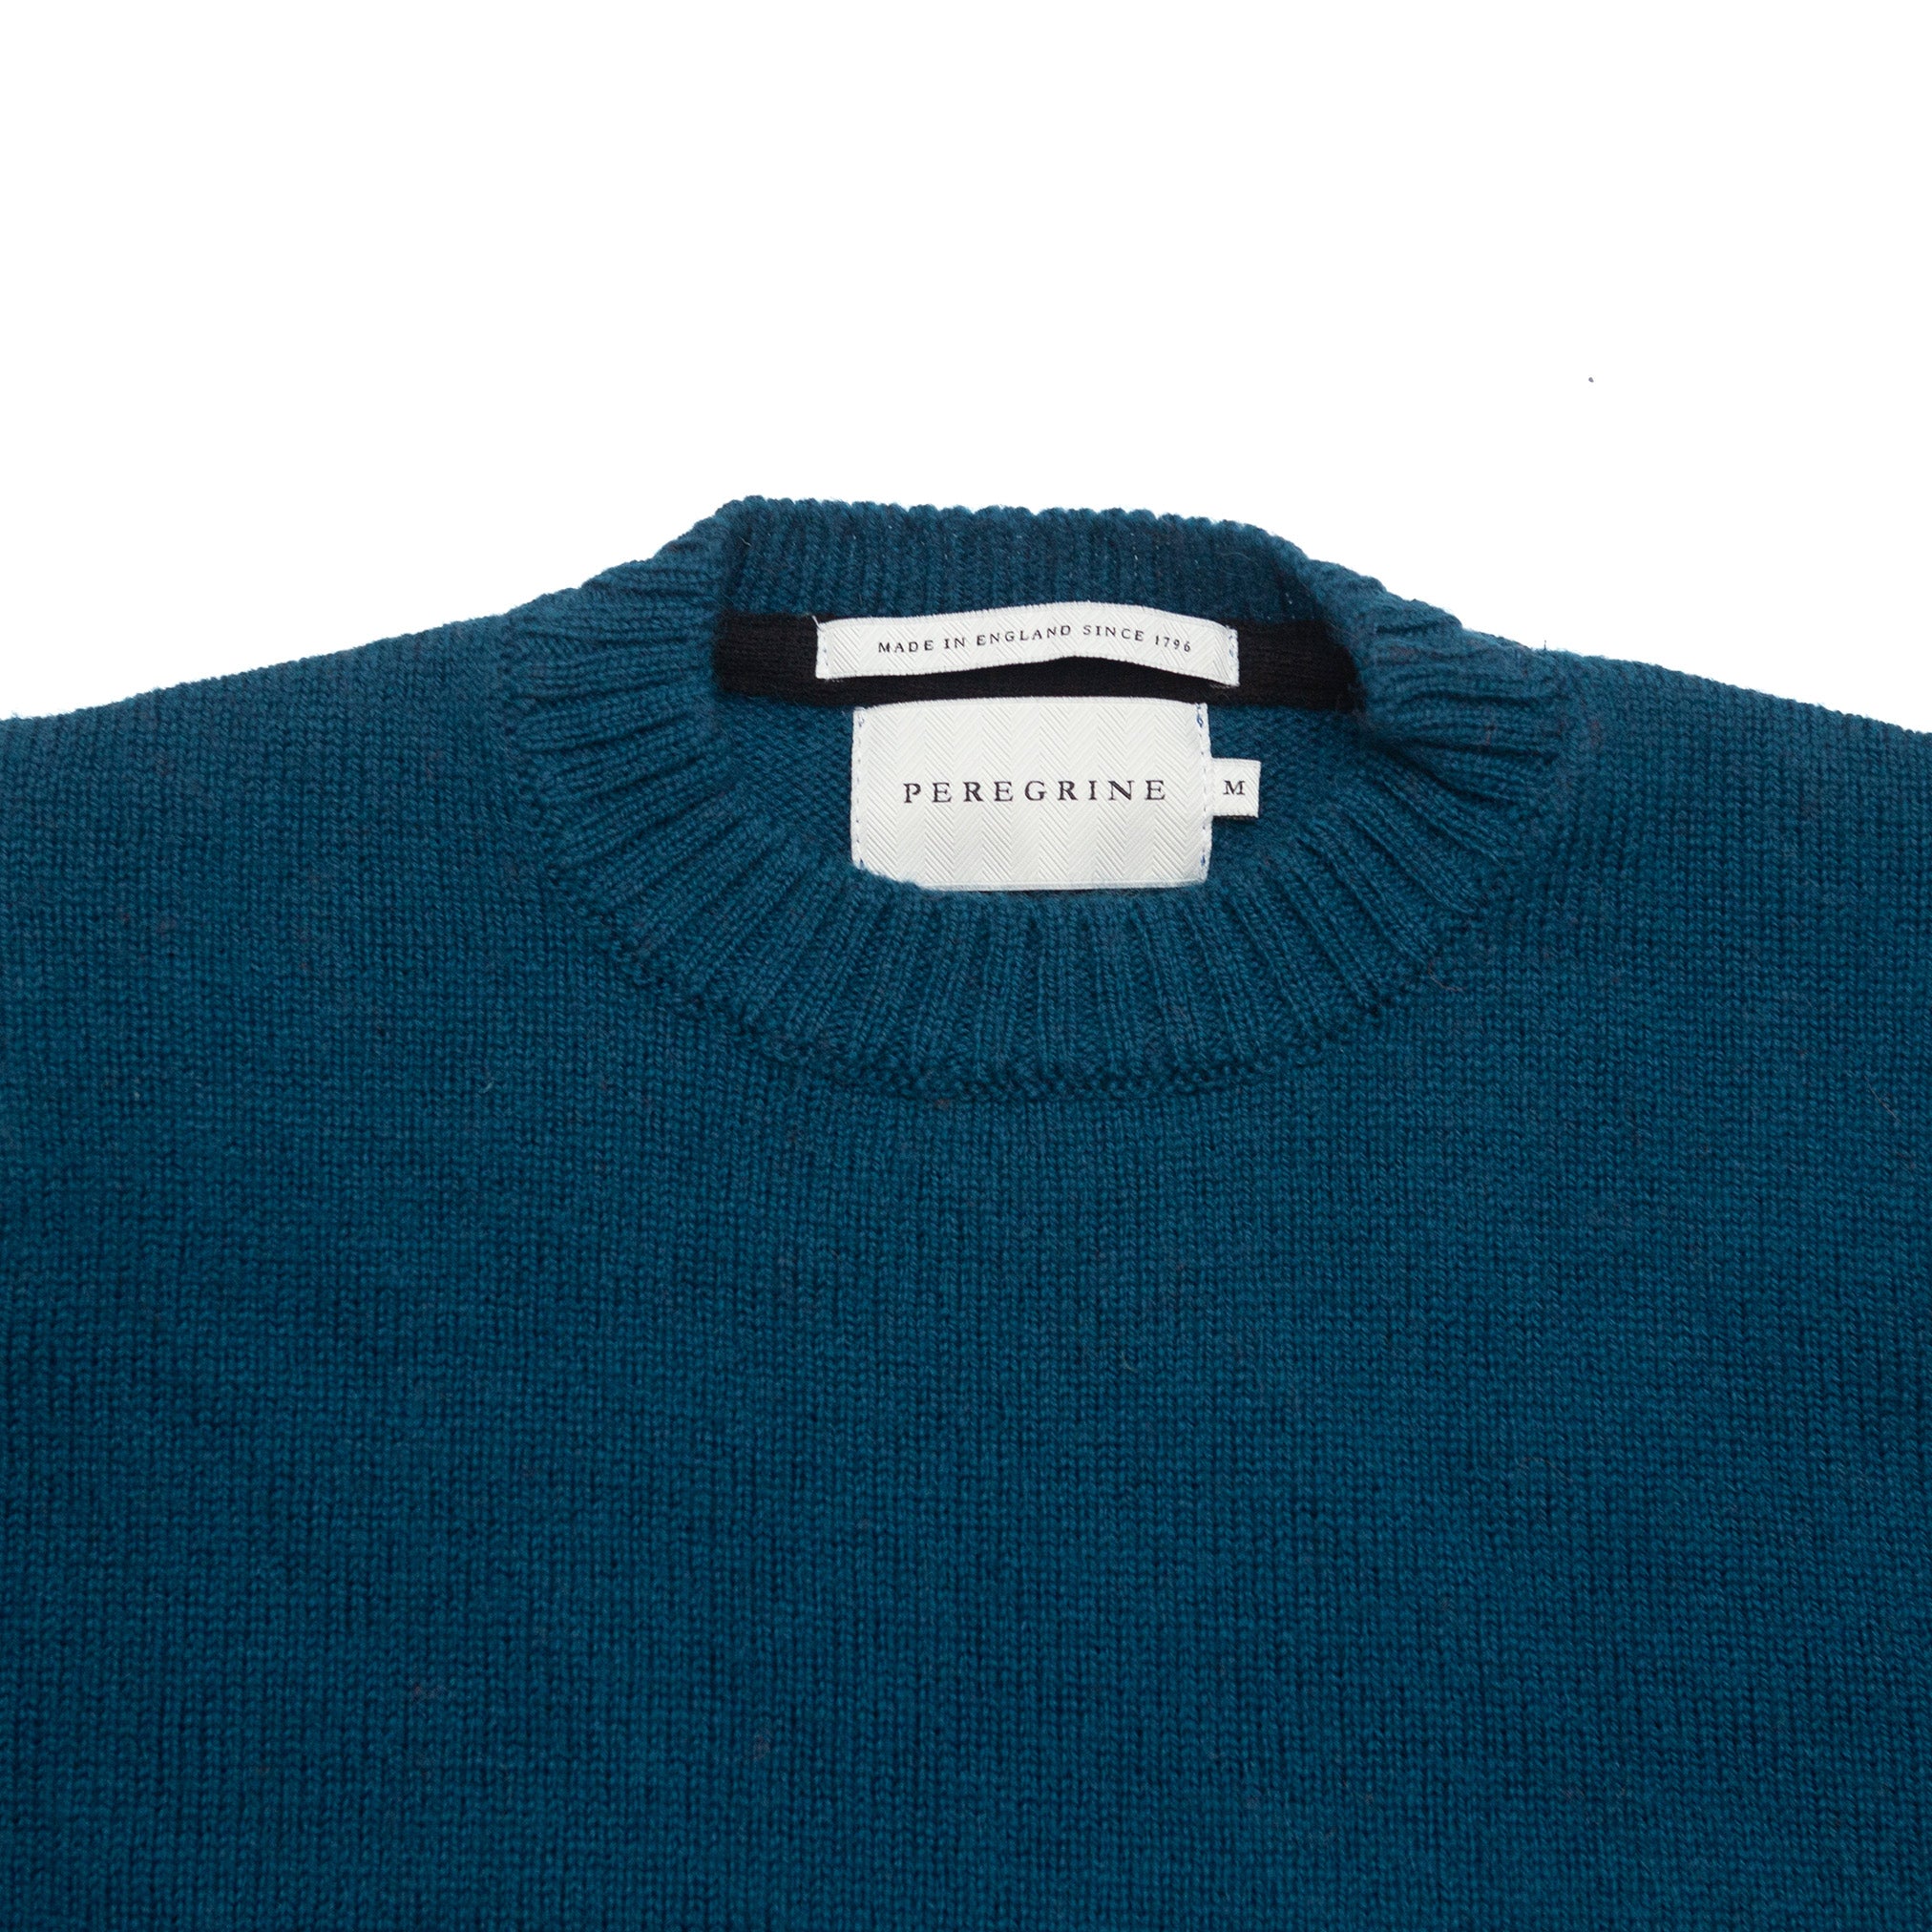 Makers Stitch Sweater in Teal